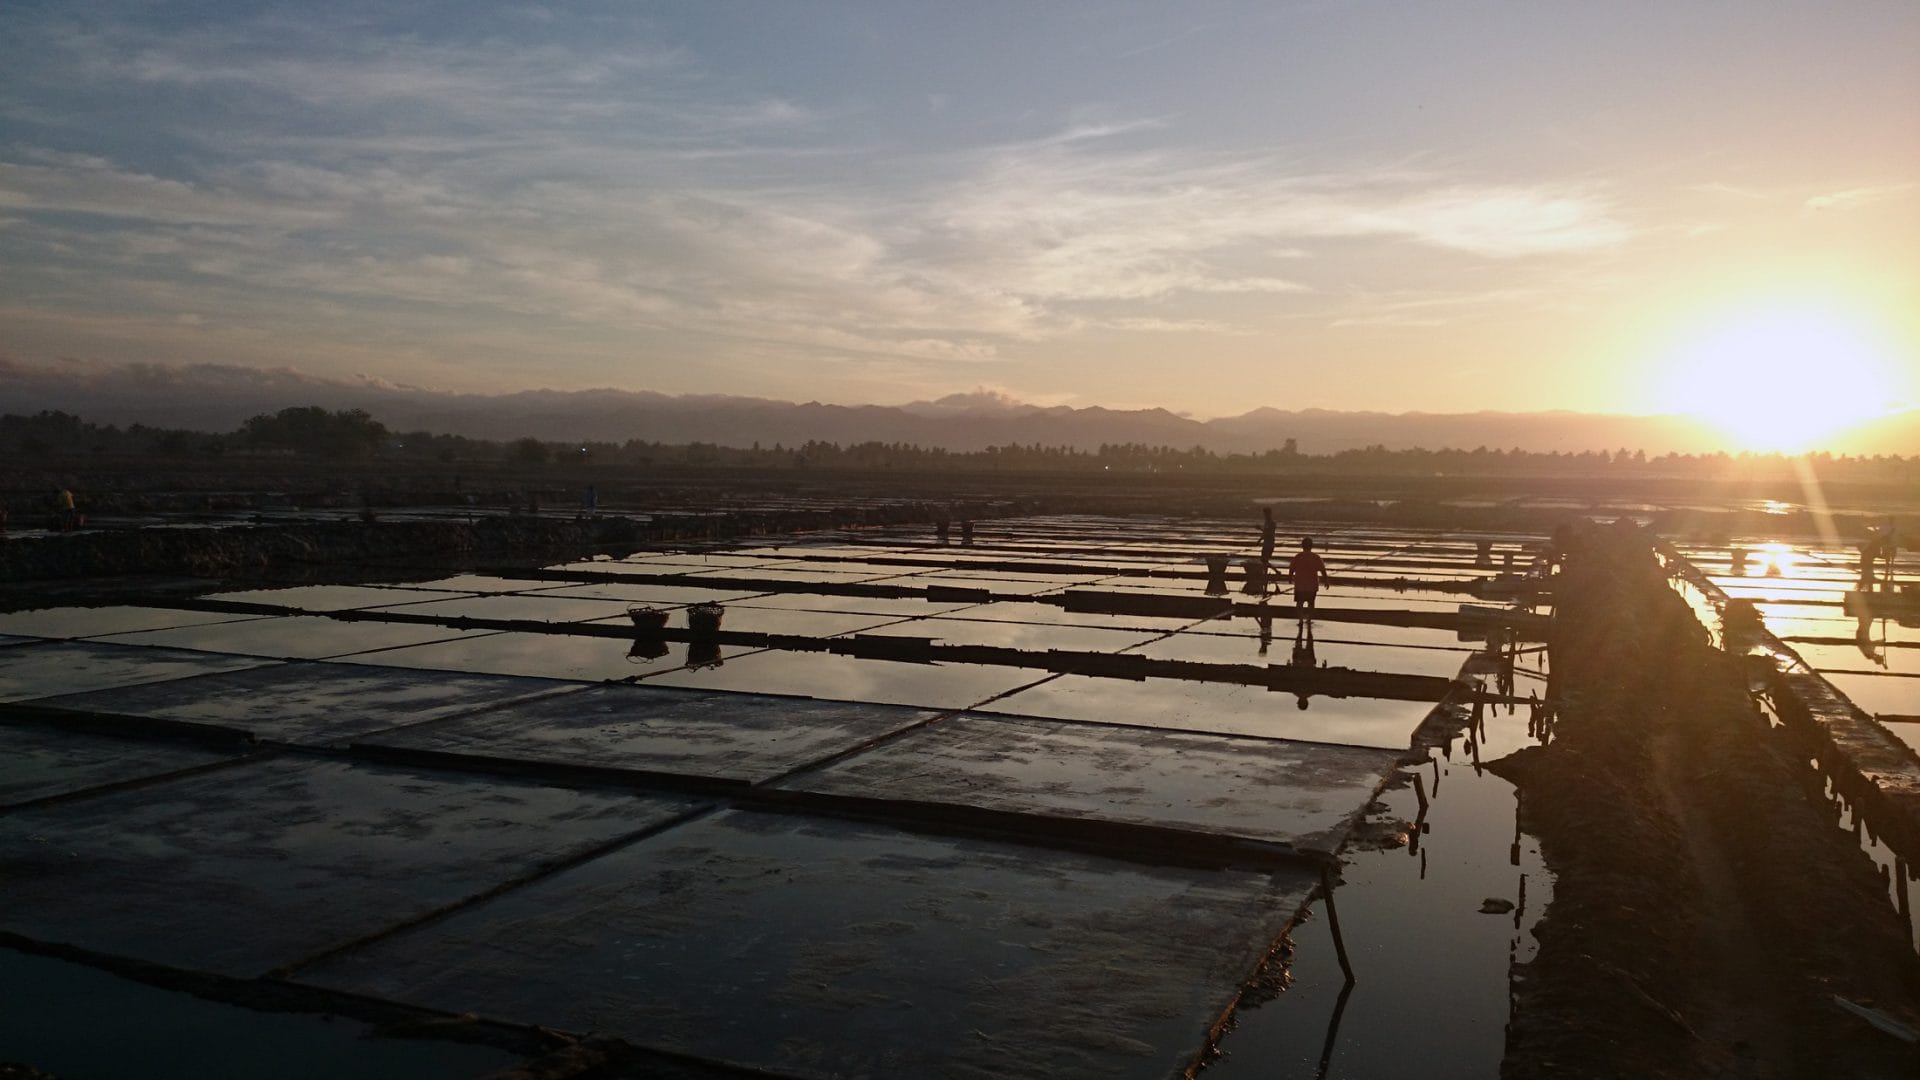 Already working the salt pans at dawn. Photo by Pete SImpson.